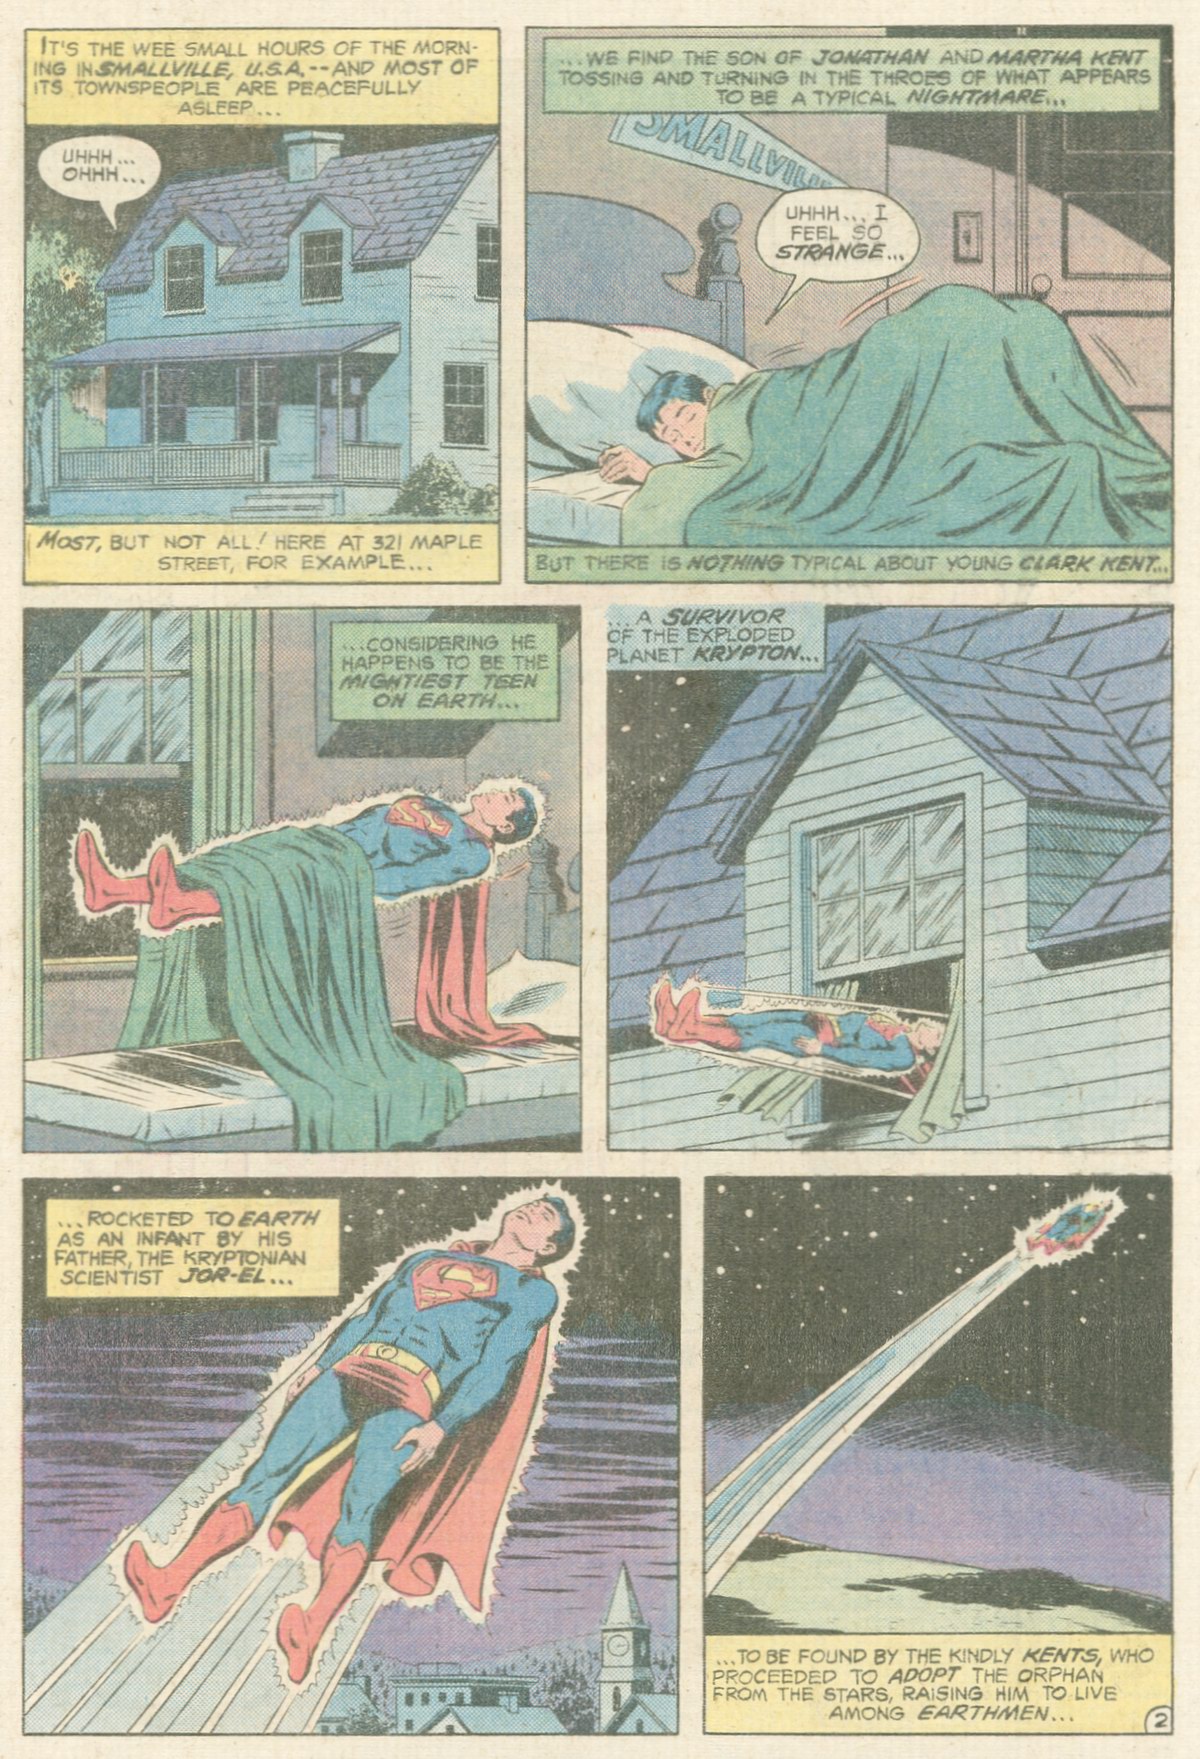 The New Adventures of Superboy 20 Page 2